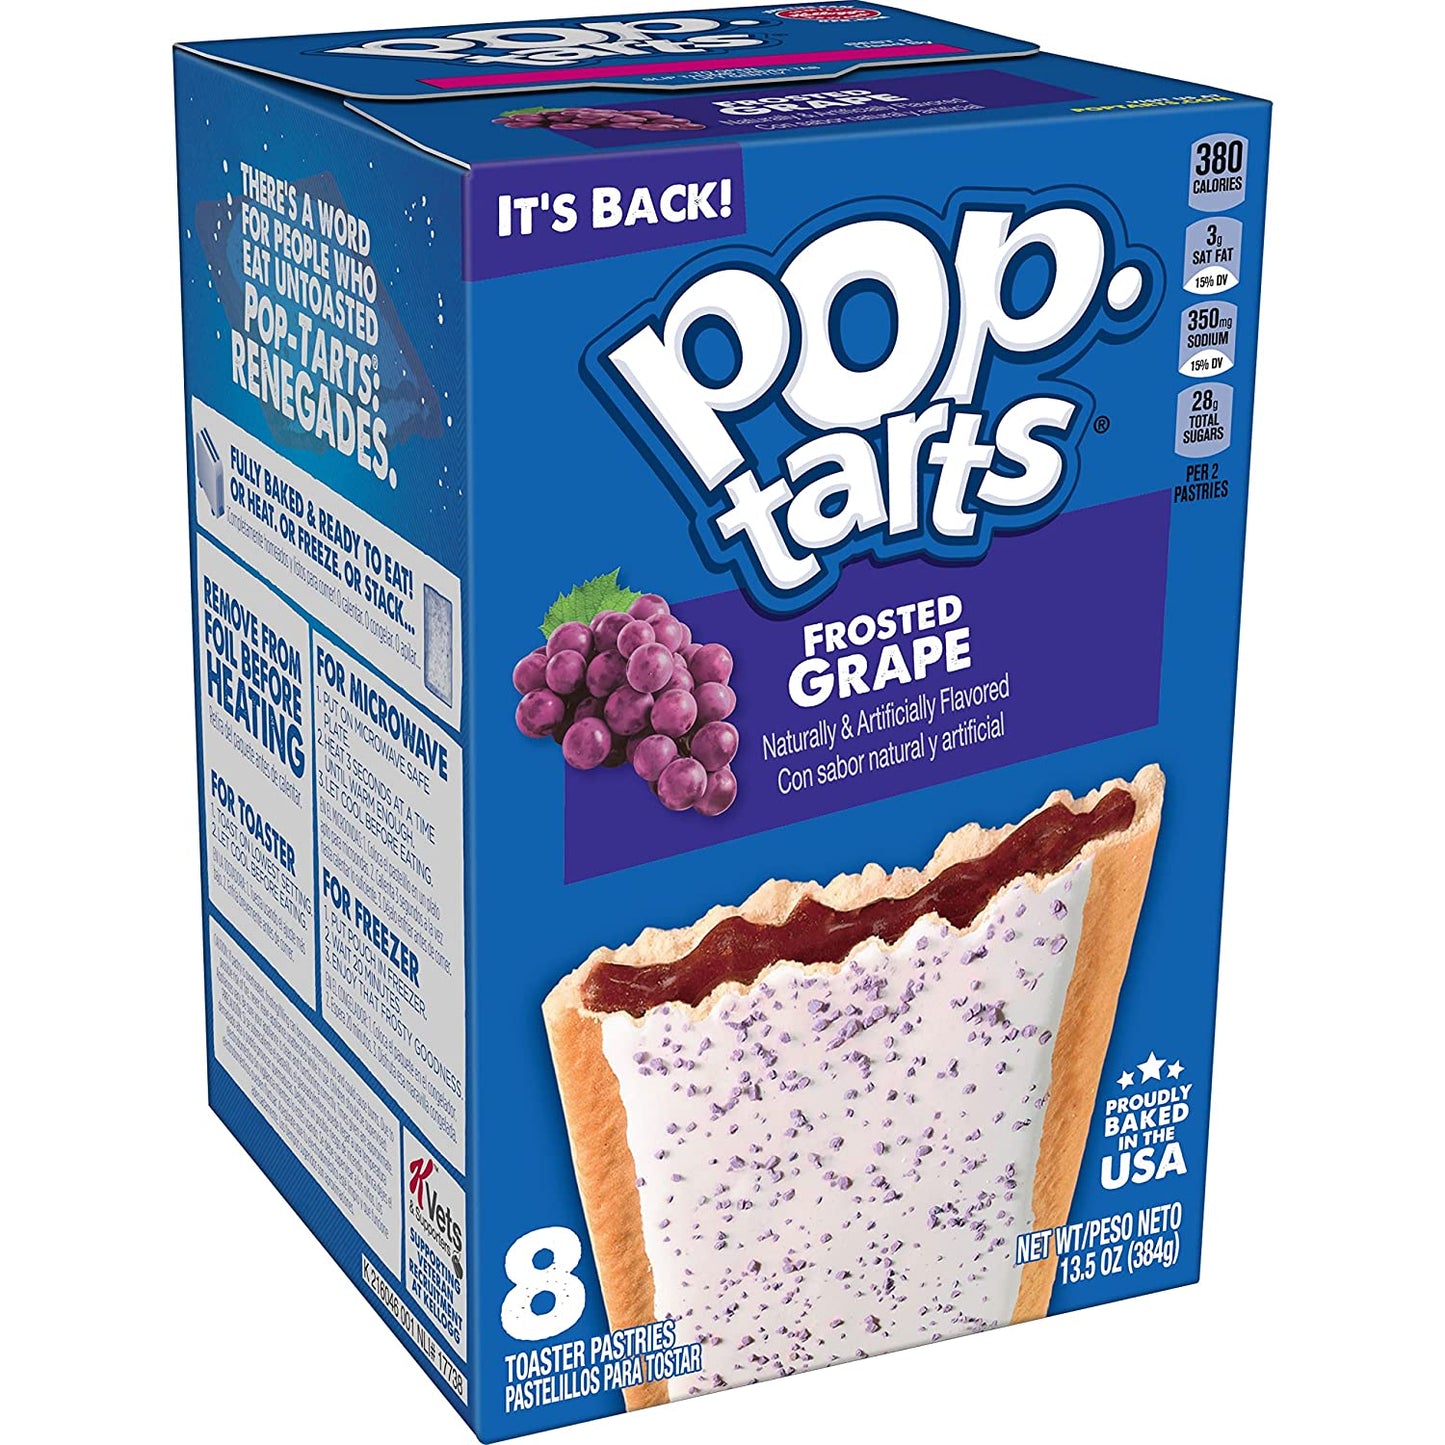 Pop-Tarts Frosted Grape